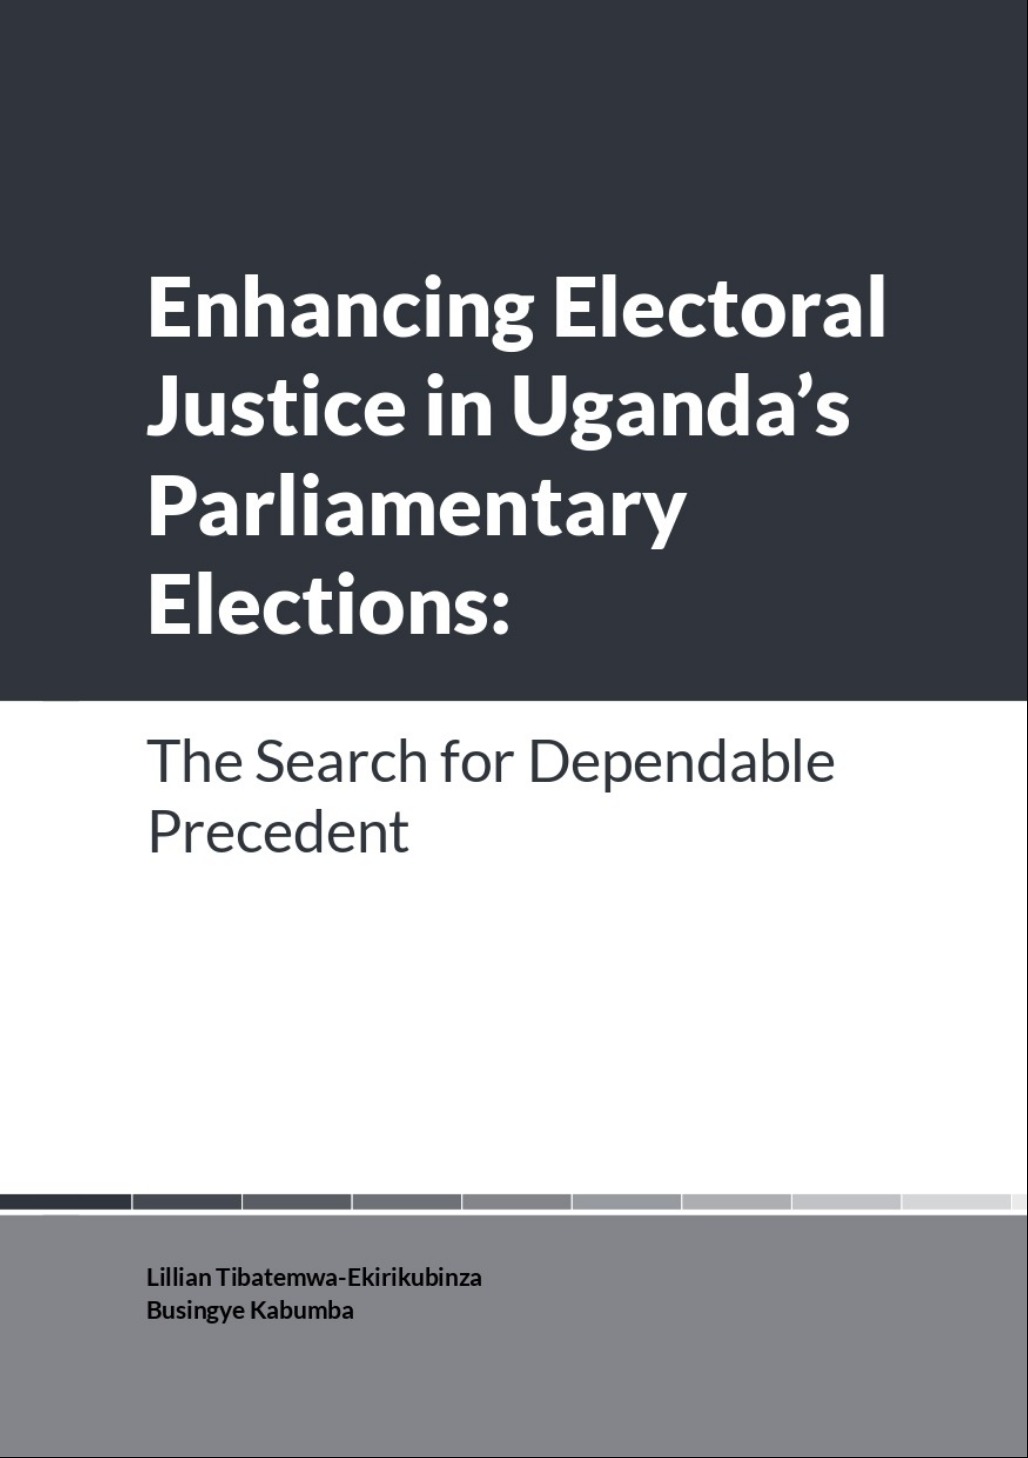 Enhancing Electoral Justice in Uganda's Parliamentary Elections: The search for Dependable Precedent